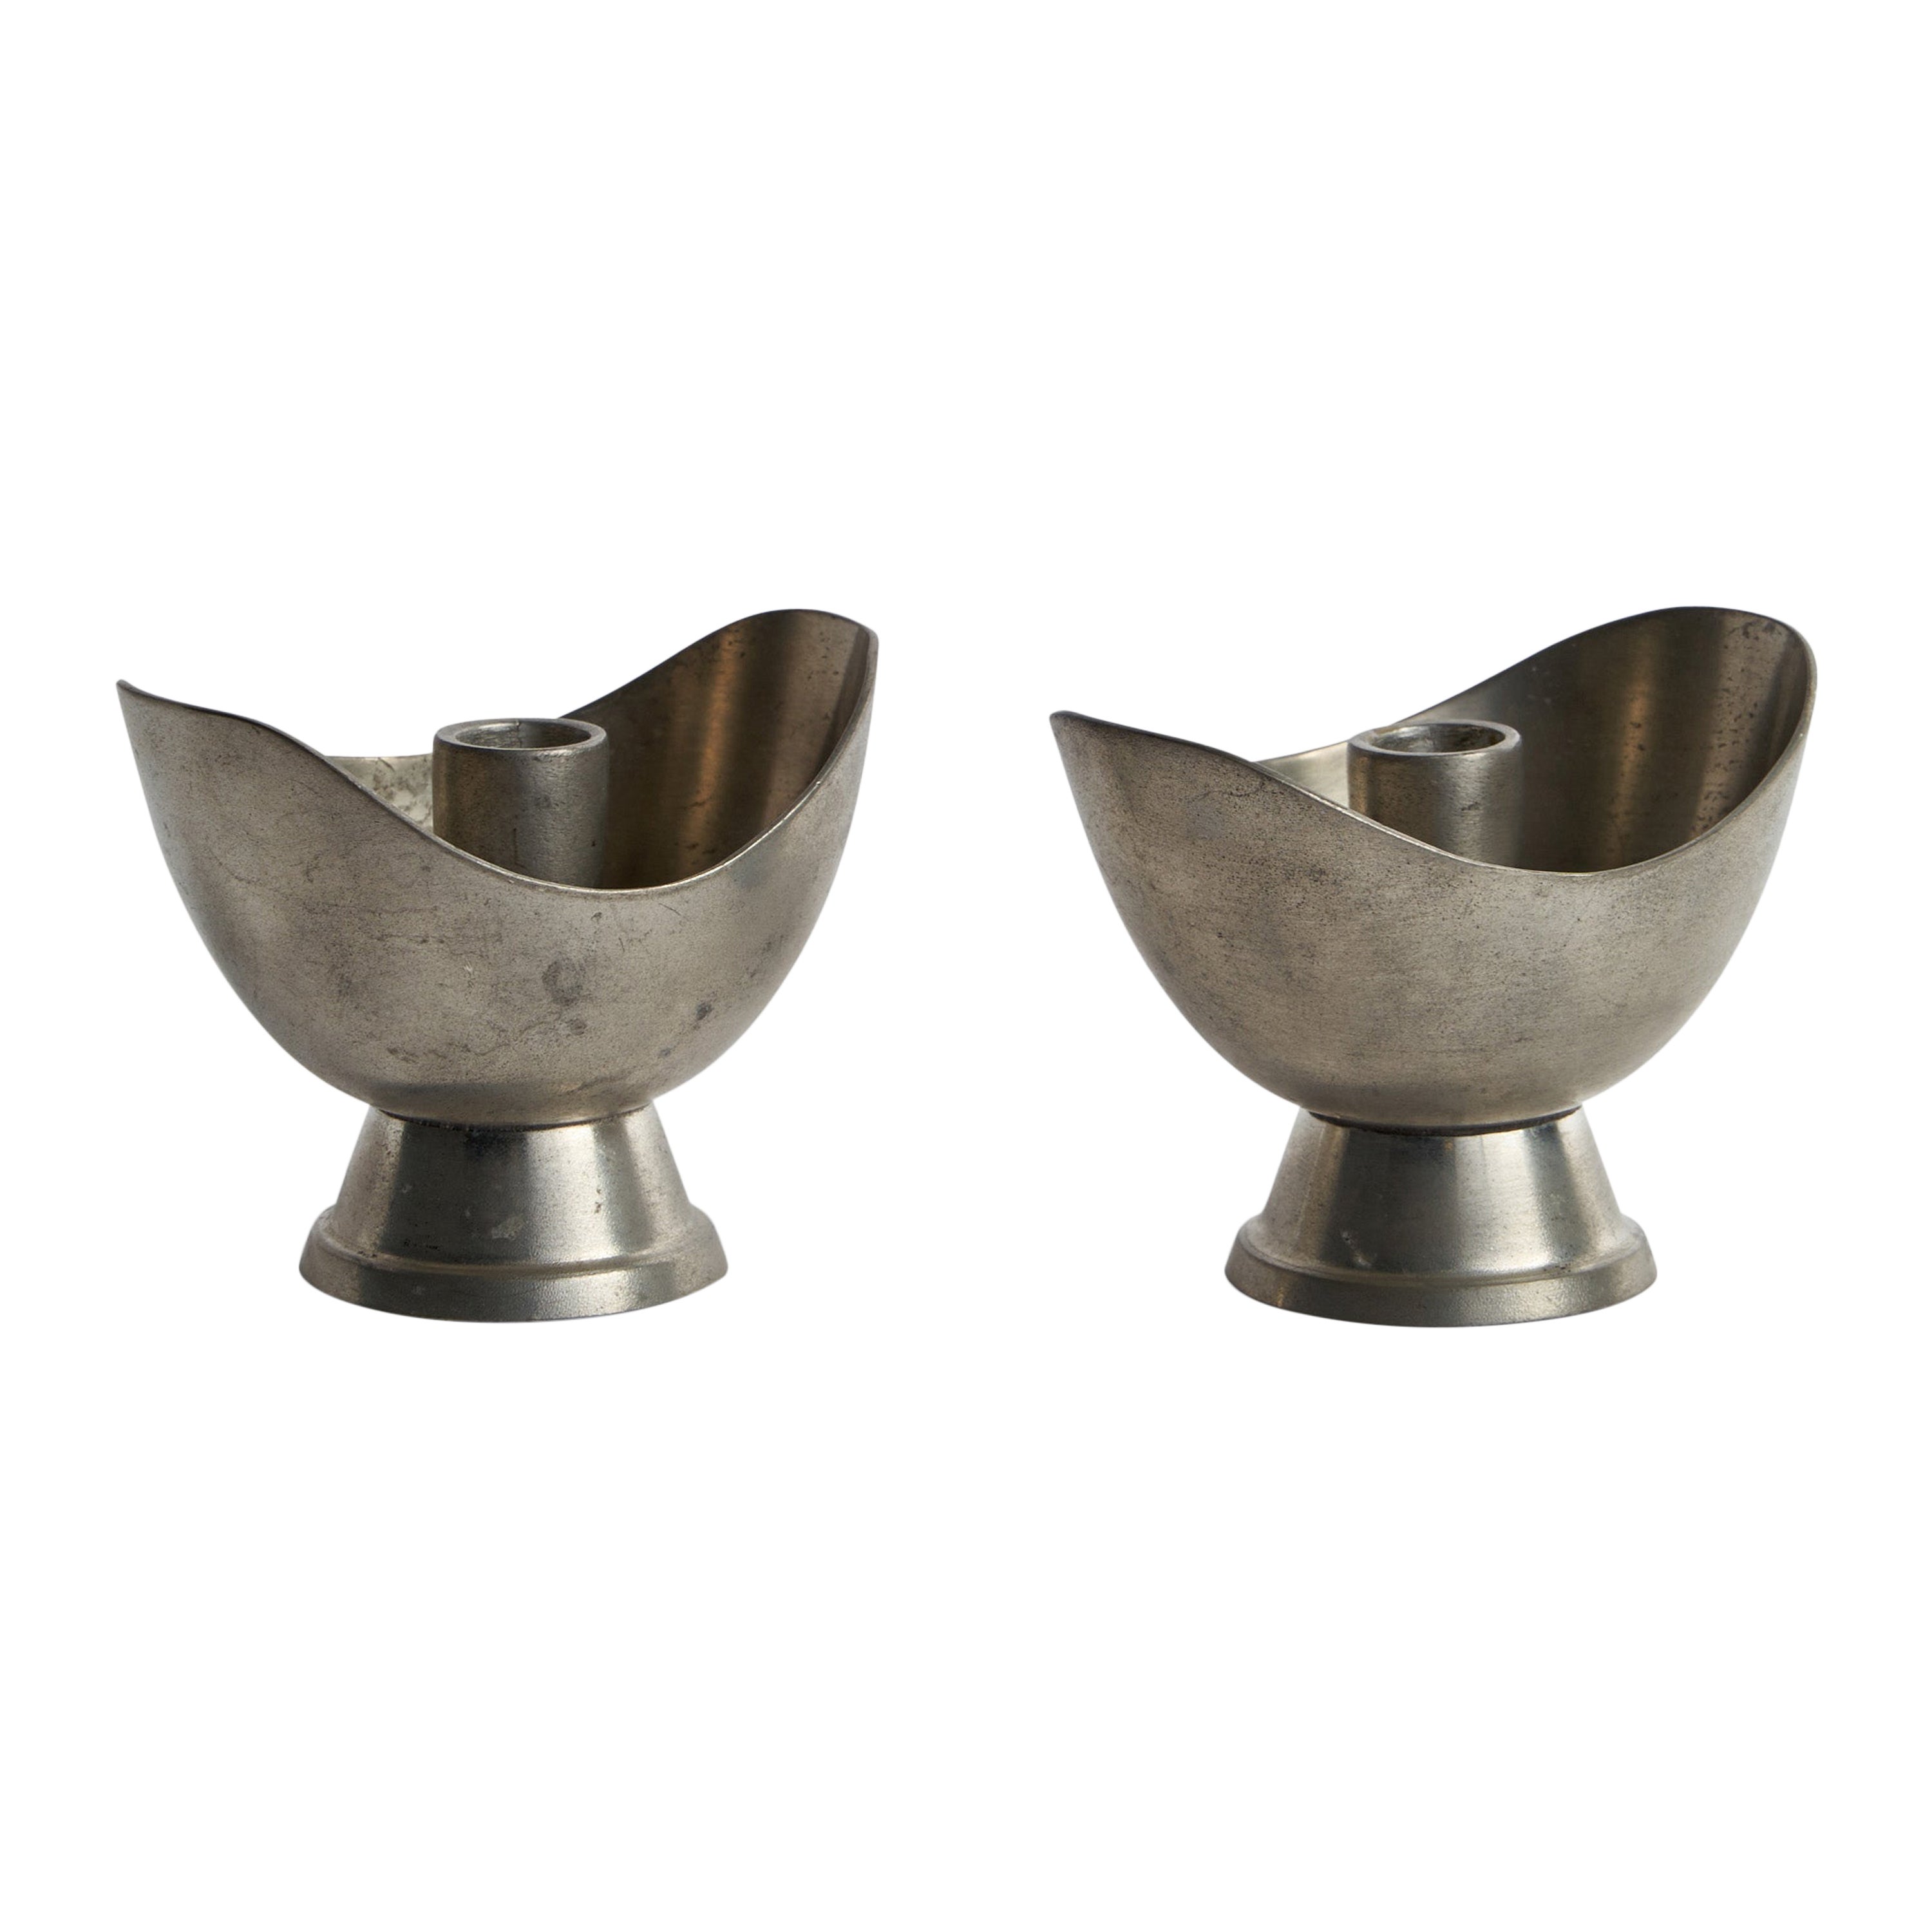 GAB, Small Candlesticks, Pewter, Sweden, 1930s For Sale